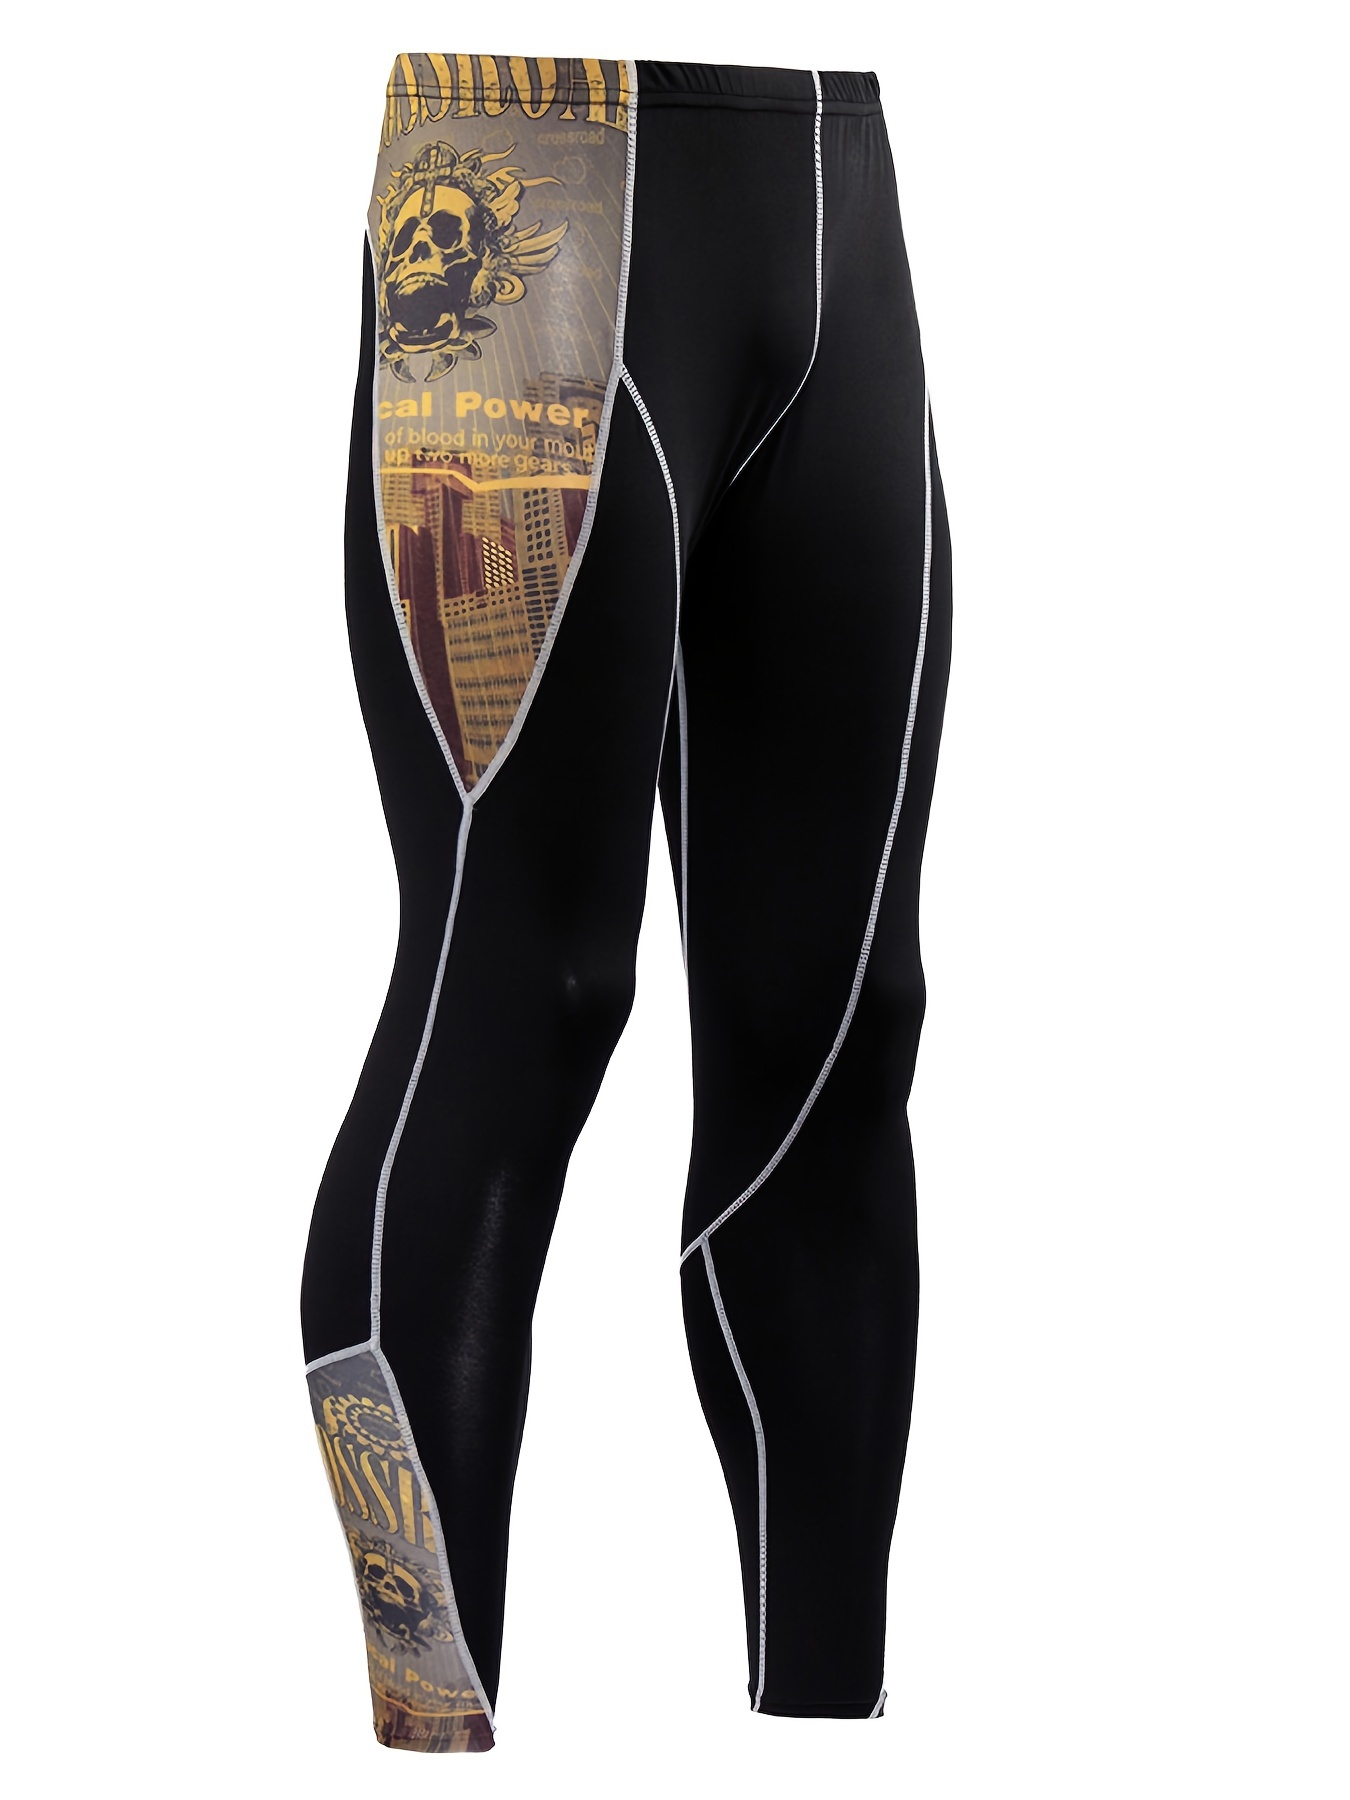 SKINS Men's A200 Compression Long Tights, Black/Yellow, X-Small, Activewear  -  Canada